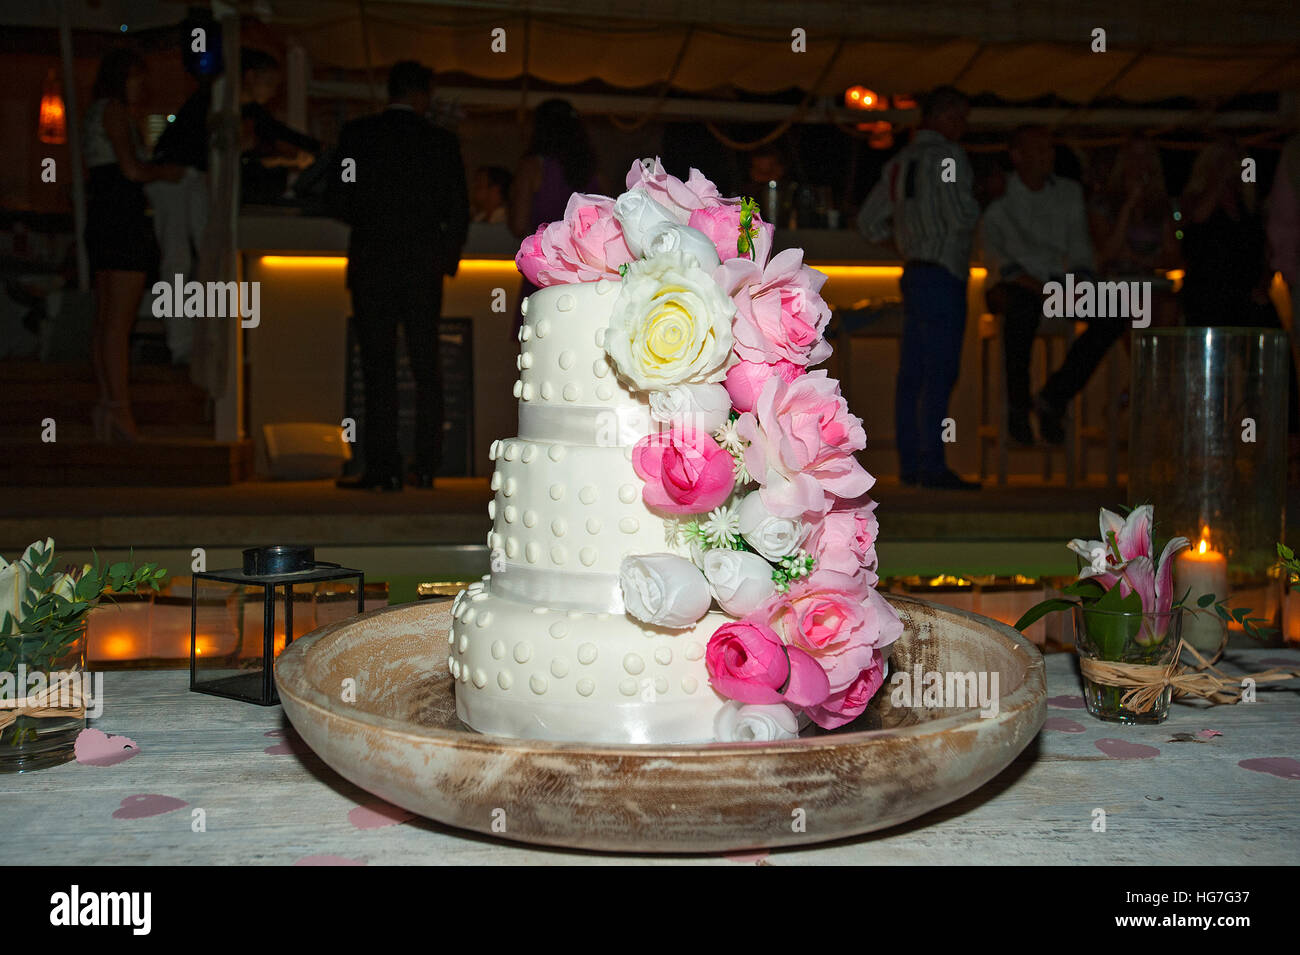 Wedding cake with Floral decoration Stock Photo